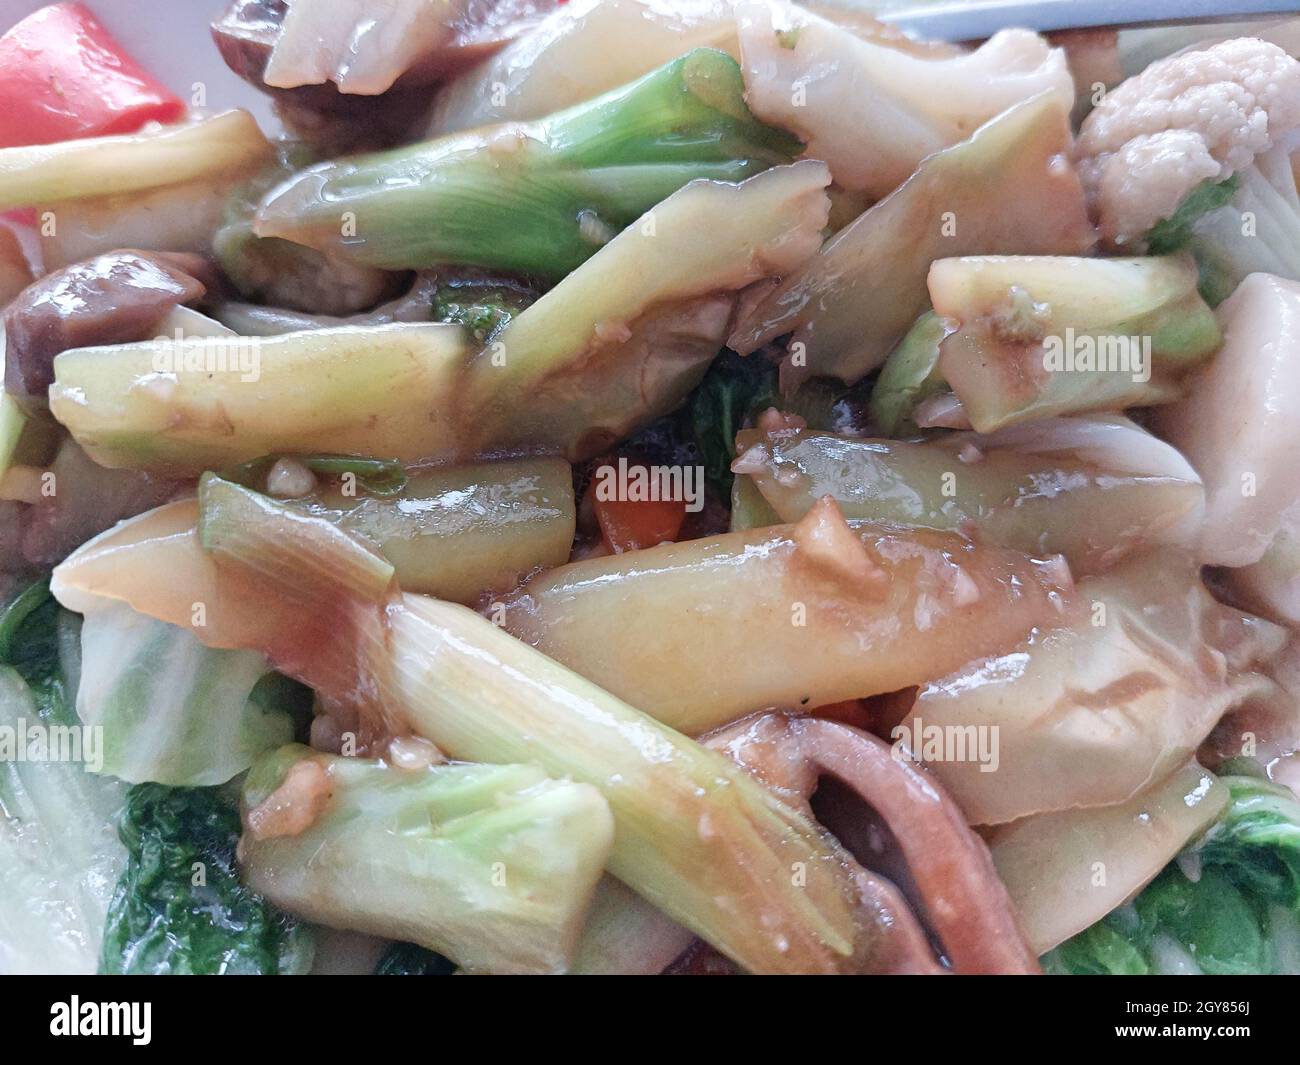 A Dish Of Mixed Asian Vegetables Stock Photo